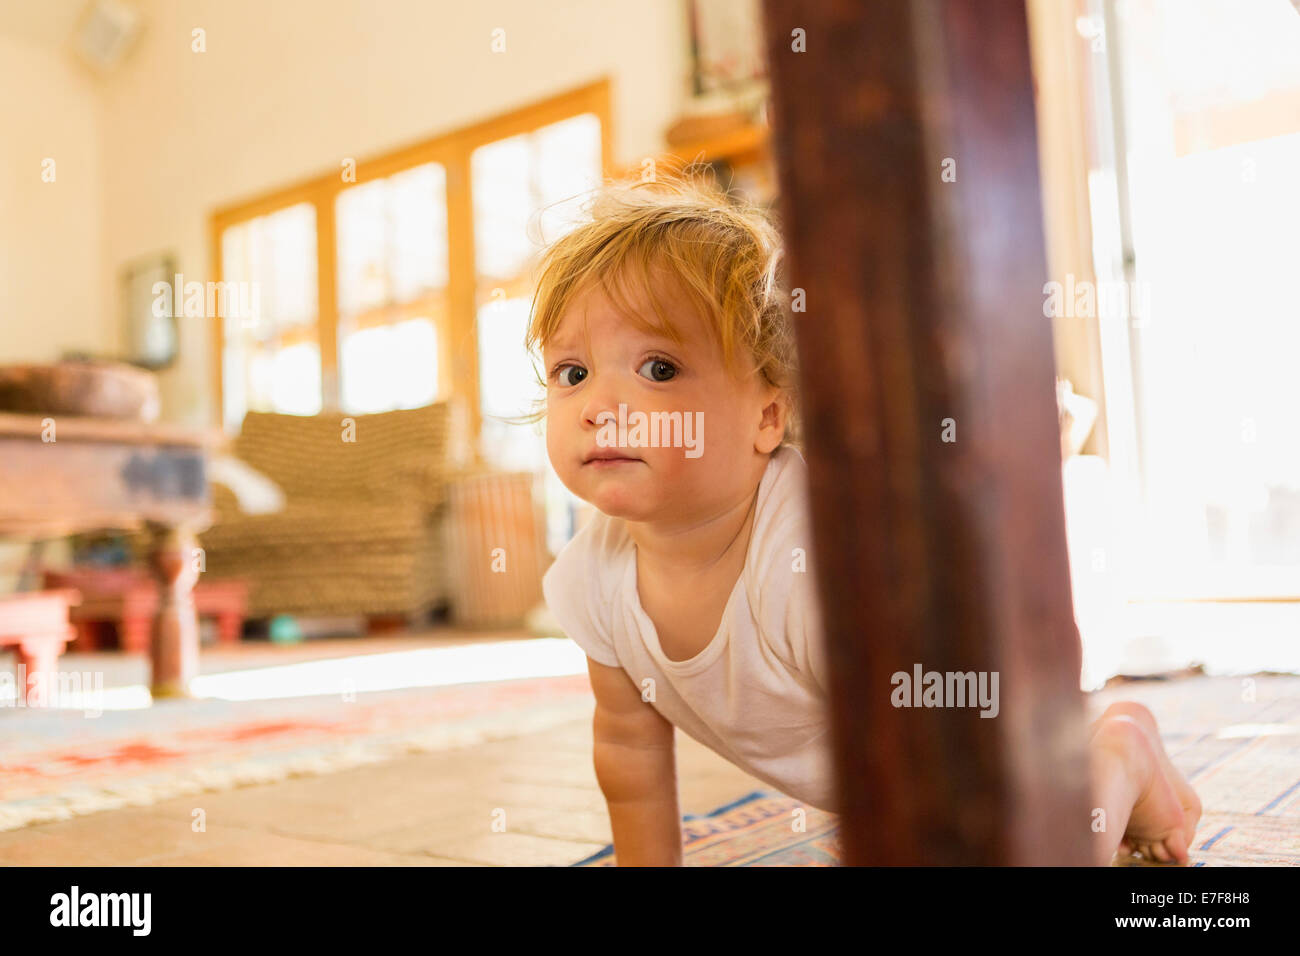 Caucasian toddler crawling on living room floor Stock Photo